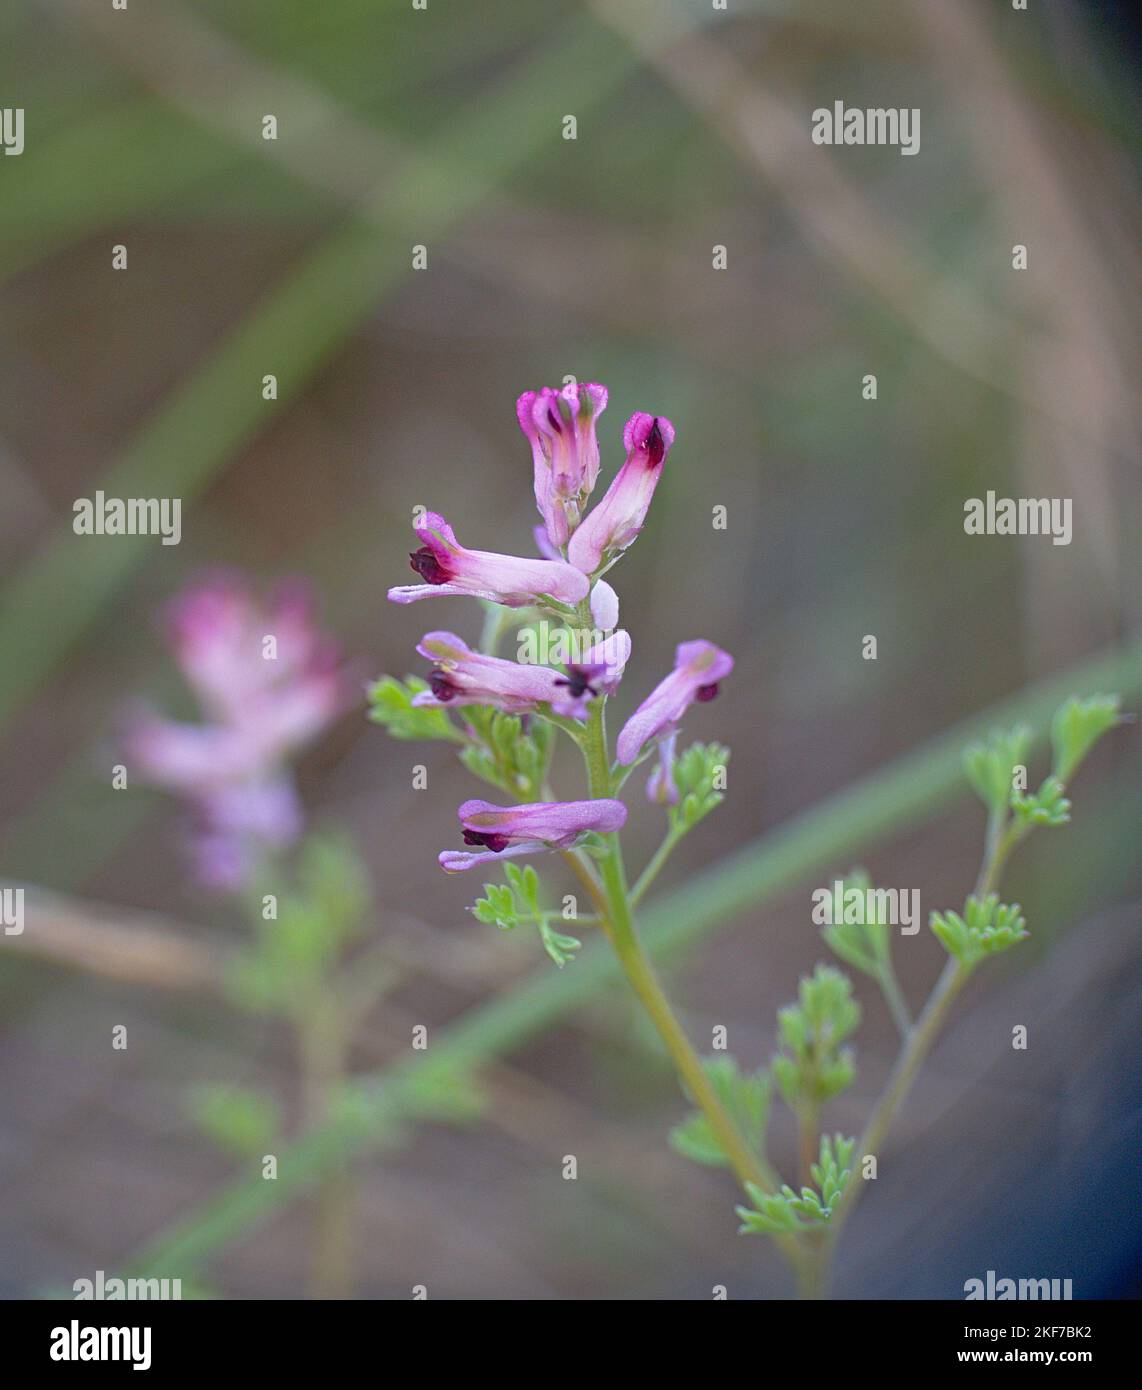 Small flowers of Fumaria officinalis L., Commonly called Blood of Christ. Pink flowers. Stock Photo